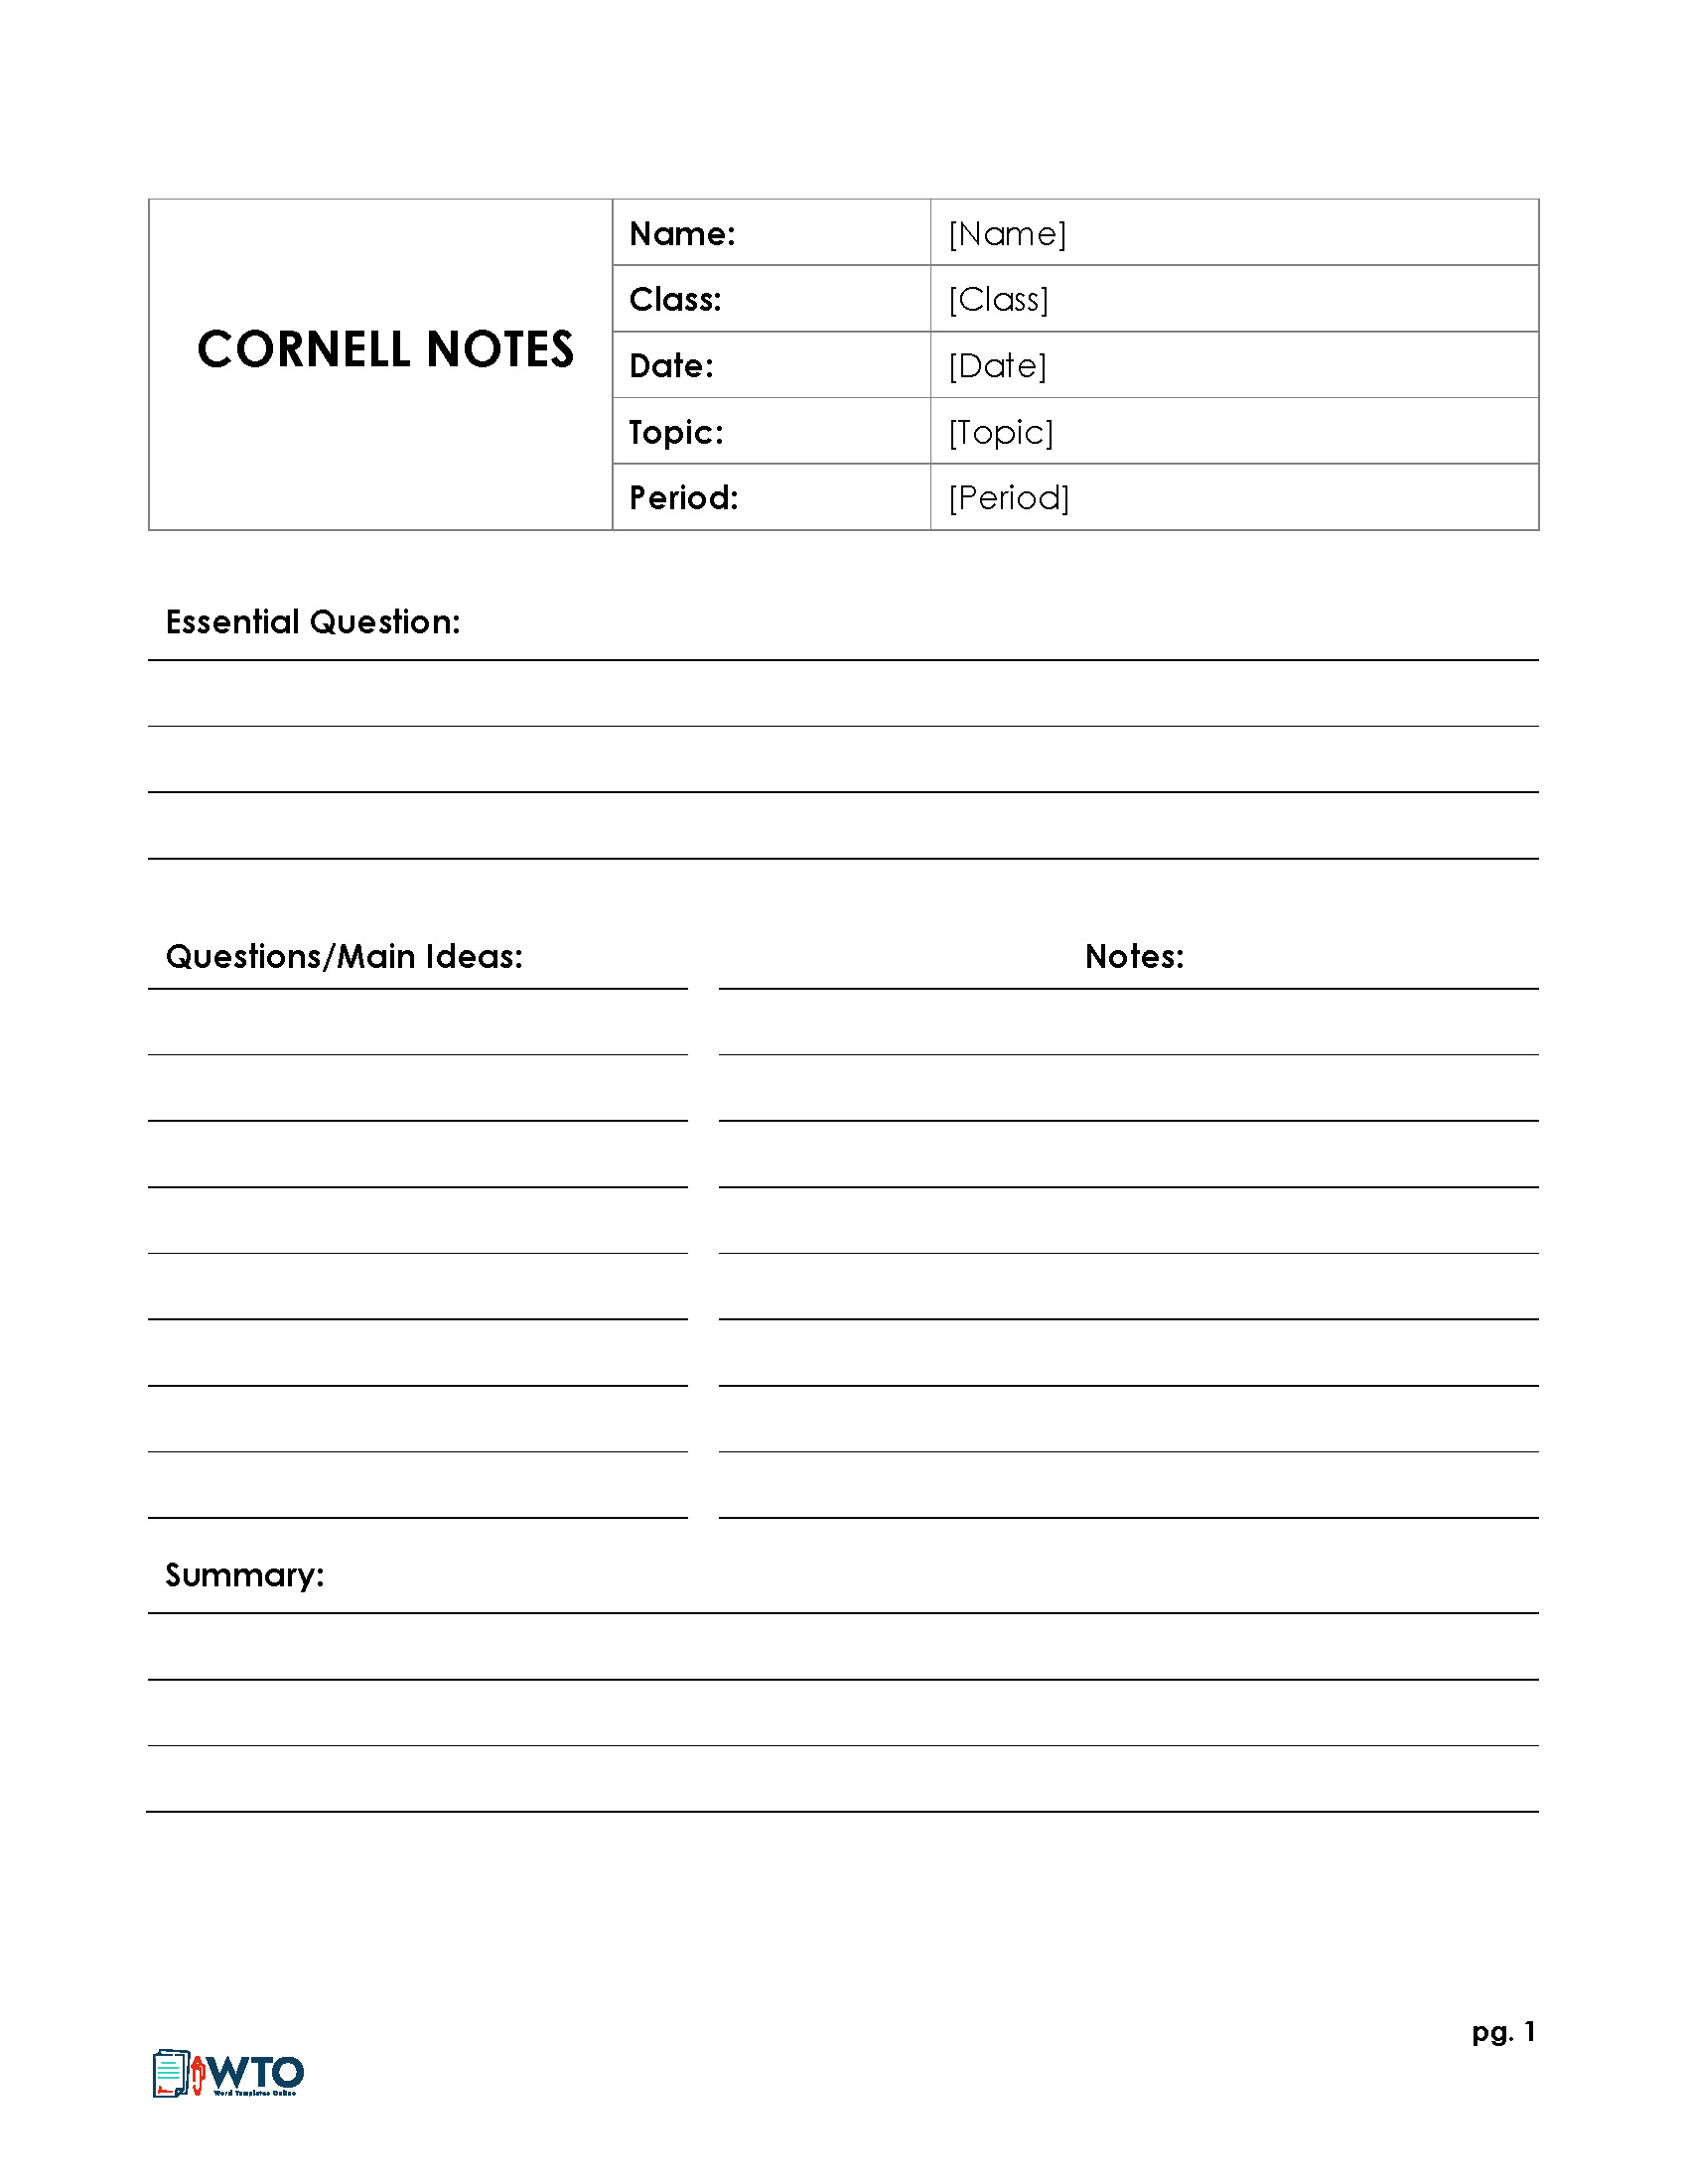 21 Free Cornell Note Templates (with Cornell Note Taking Explained) Regarding Cornell Note Template Word